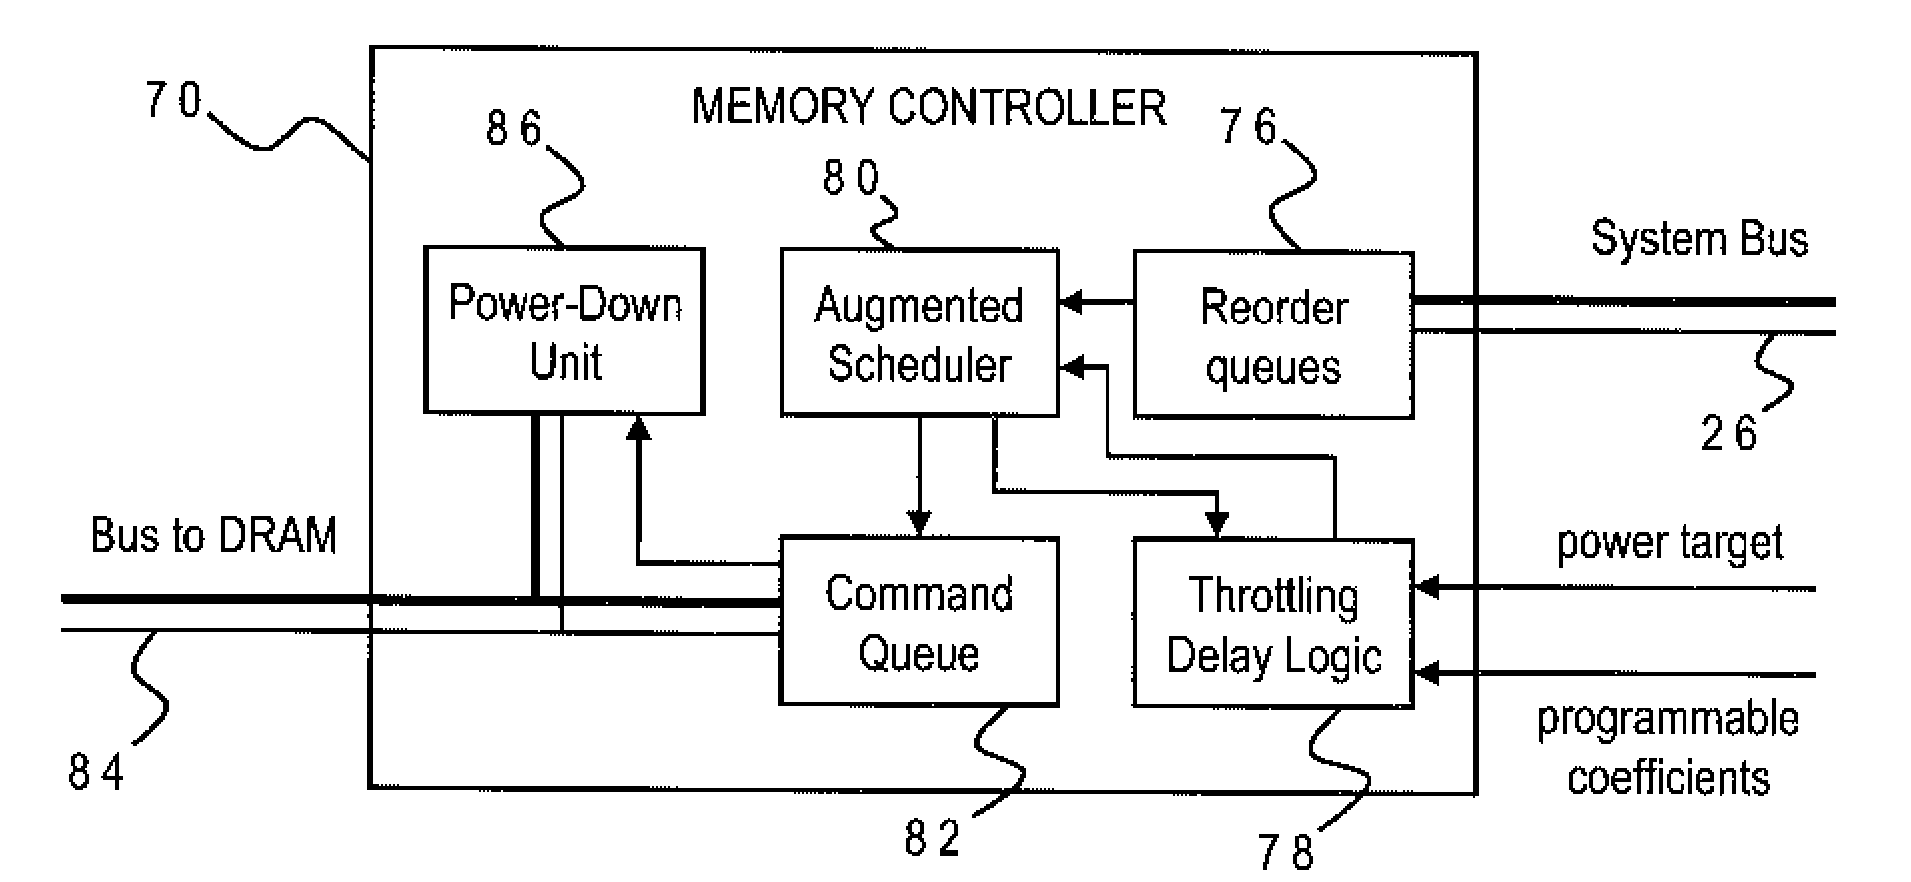 DRAM Power Management in a Memory Controller